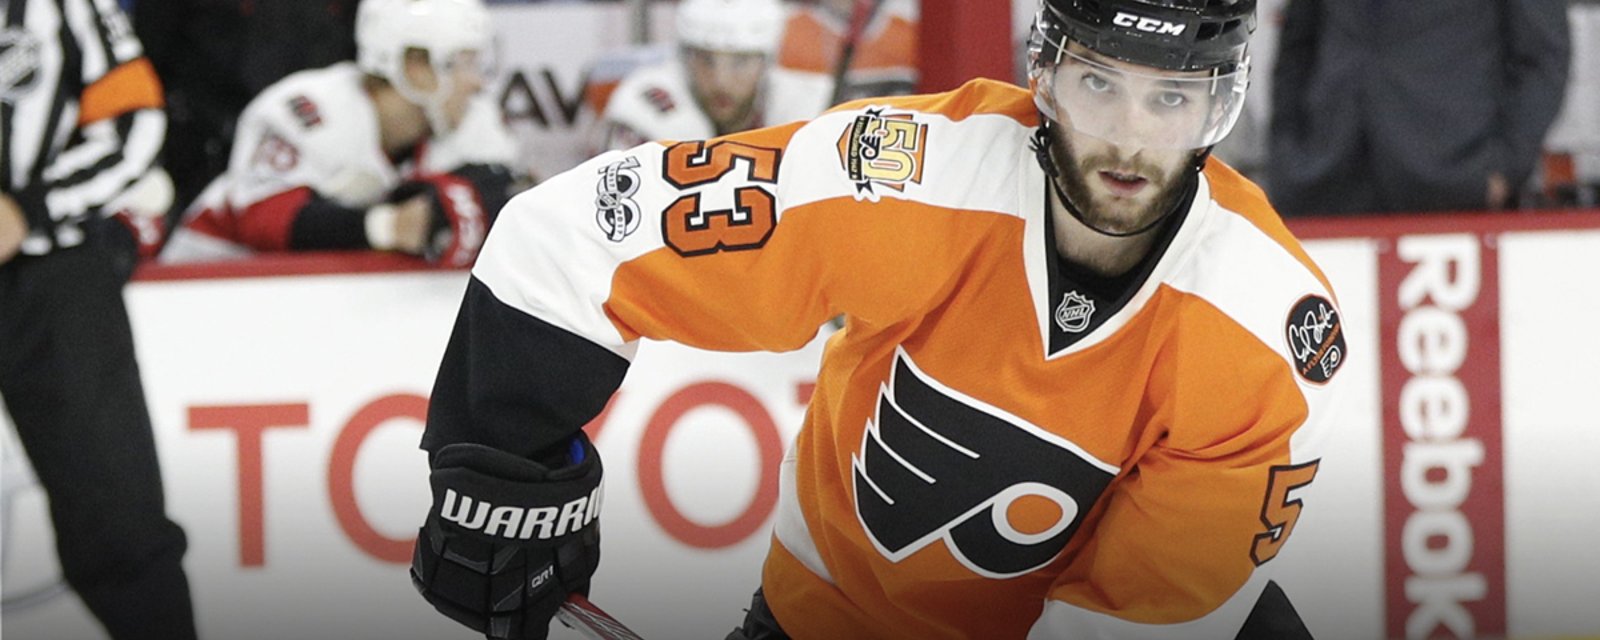 Report: Status update on Gostisbehere and Patrick injuries